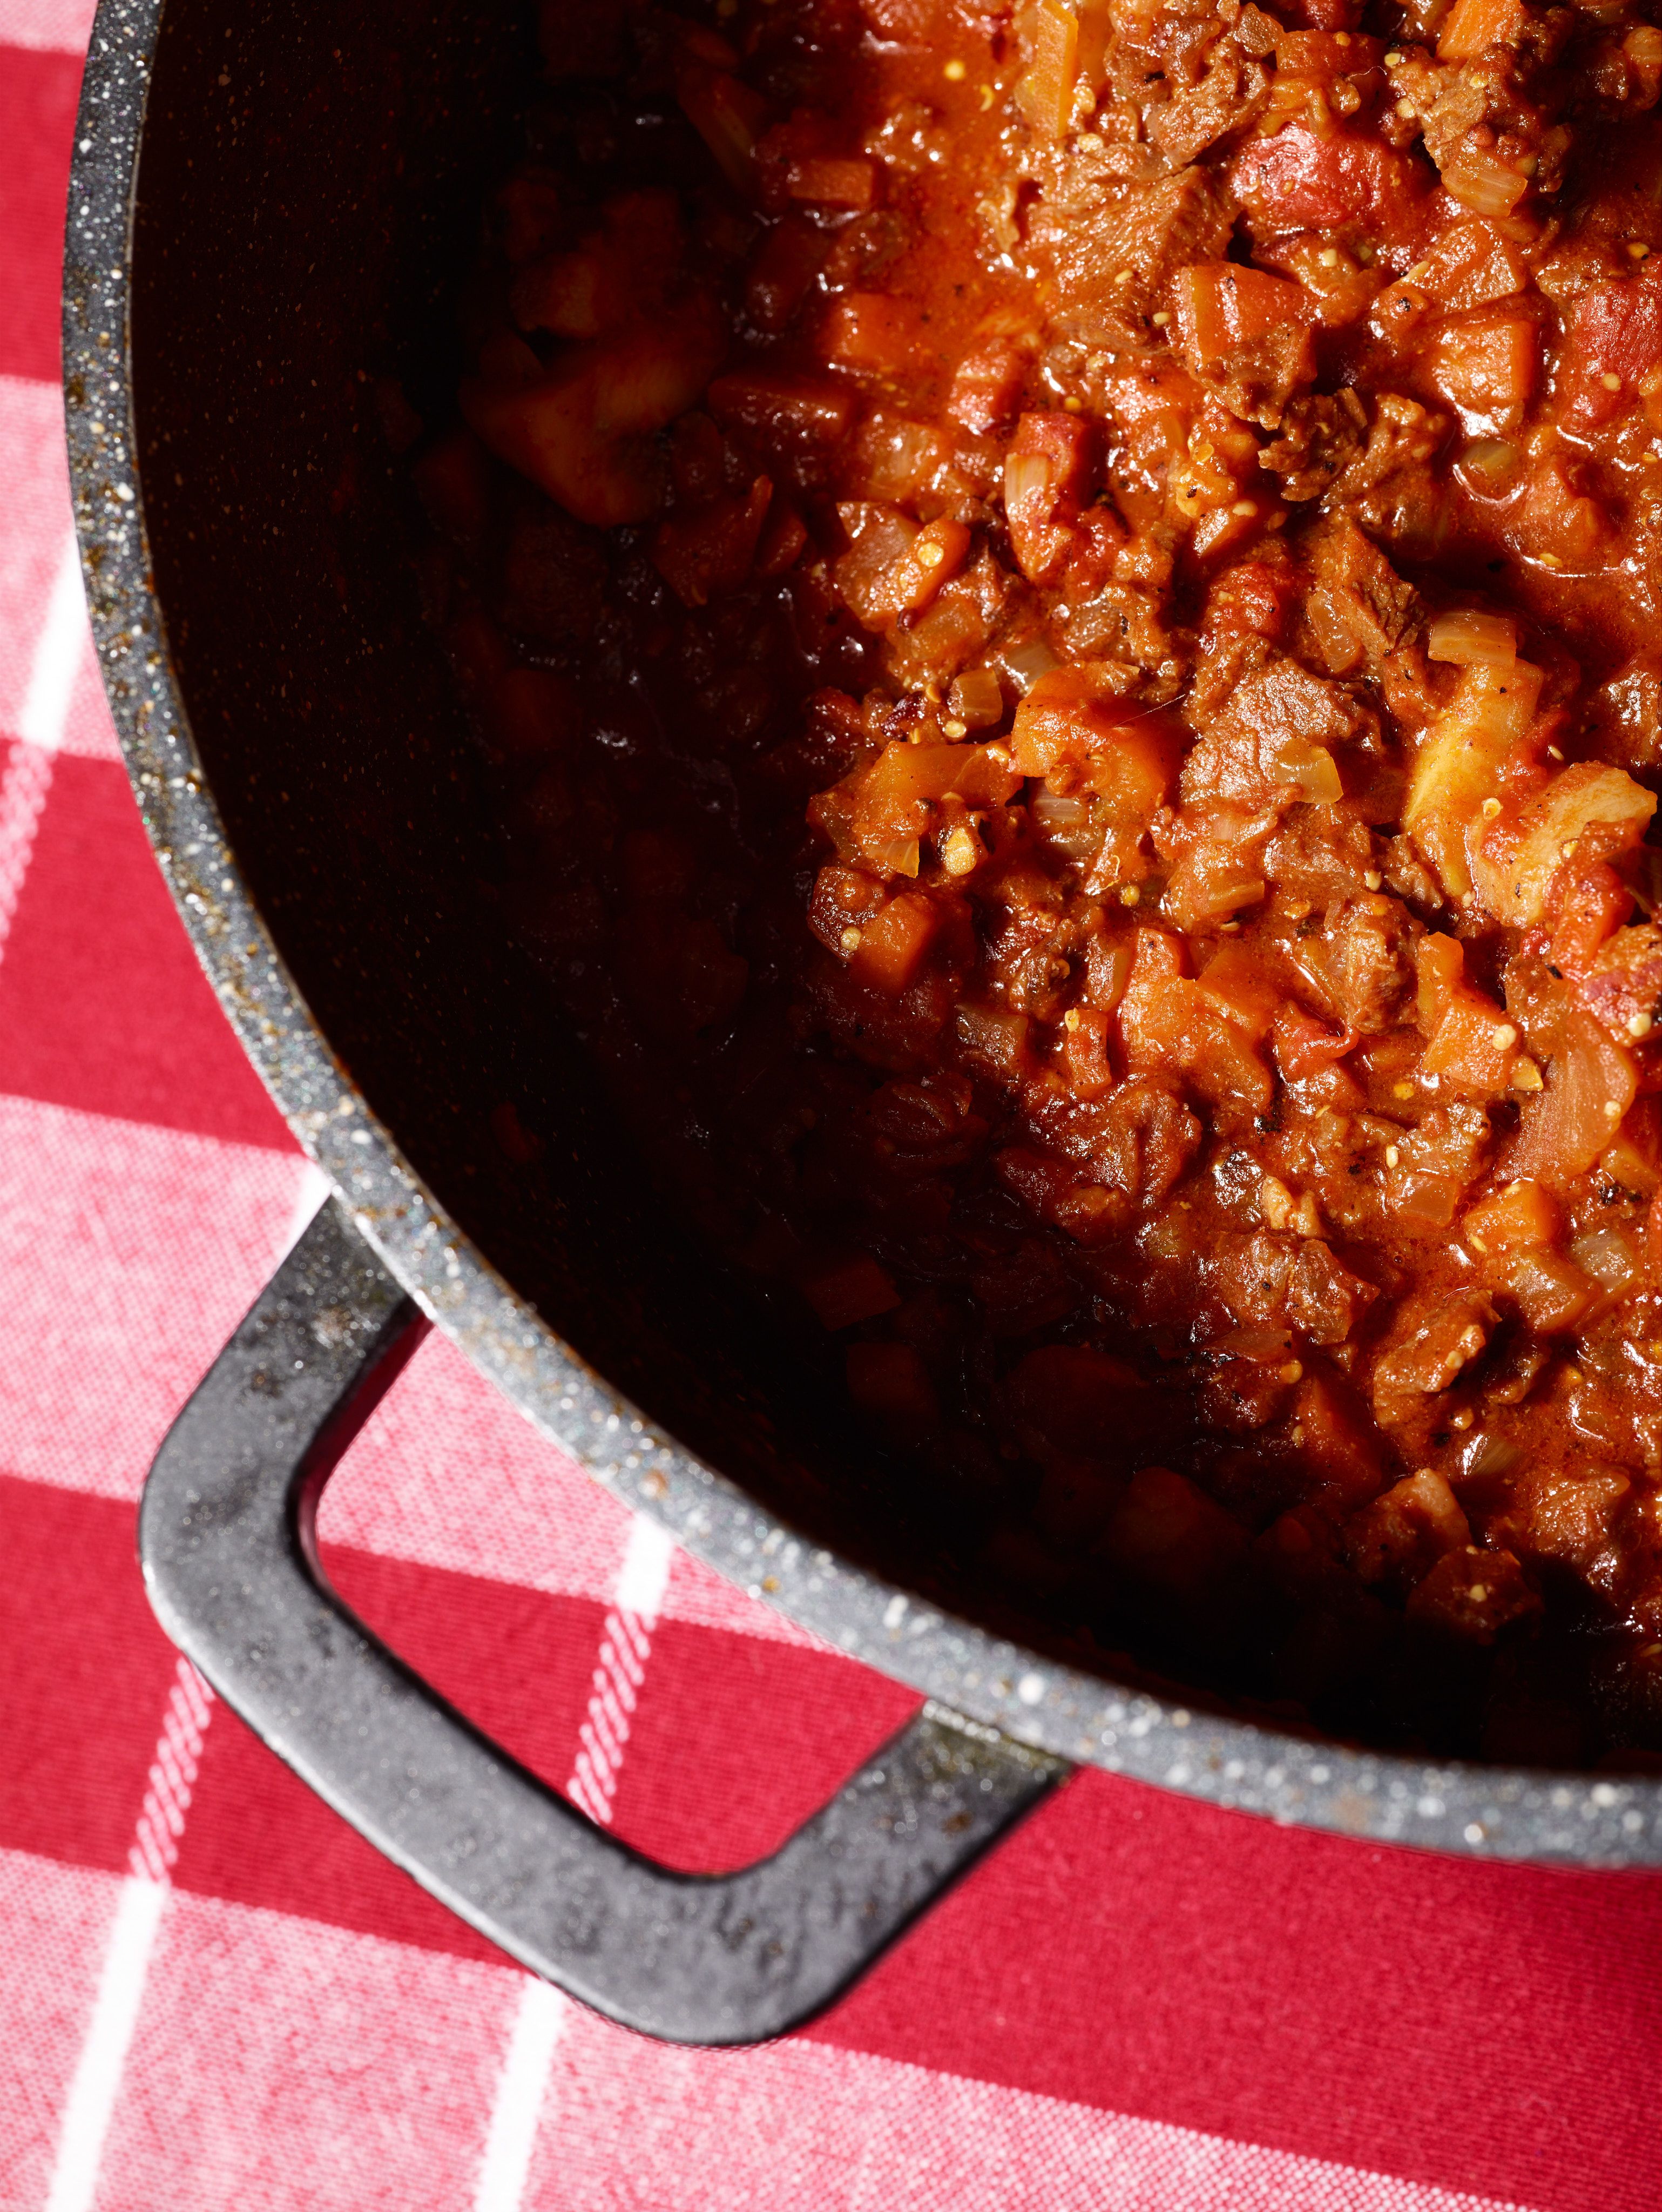 A close-up of the finished ragù